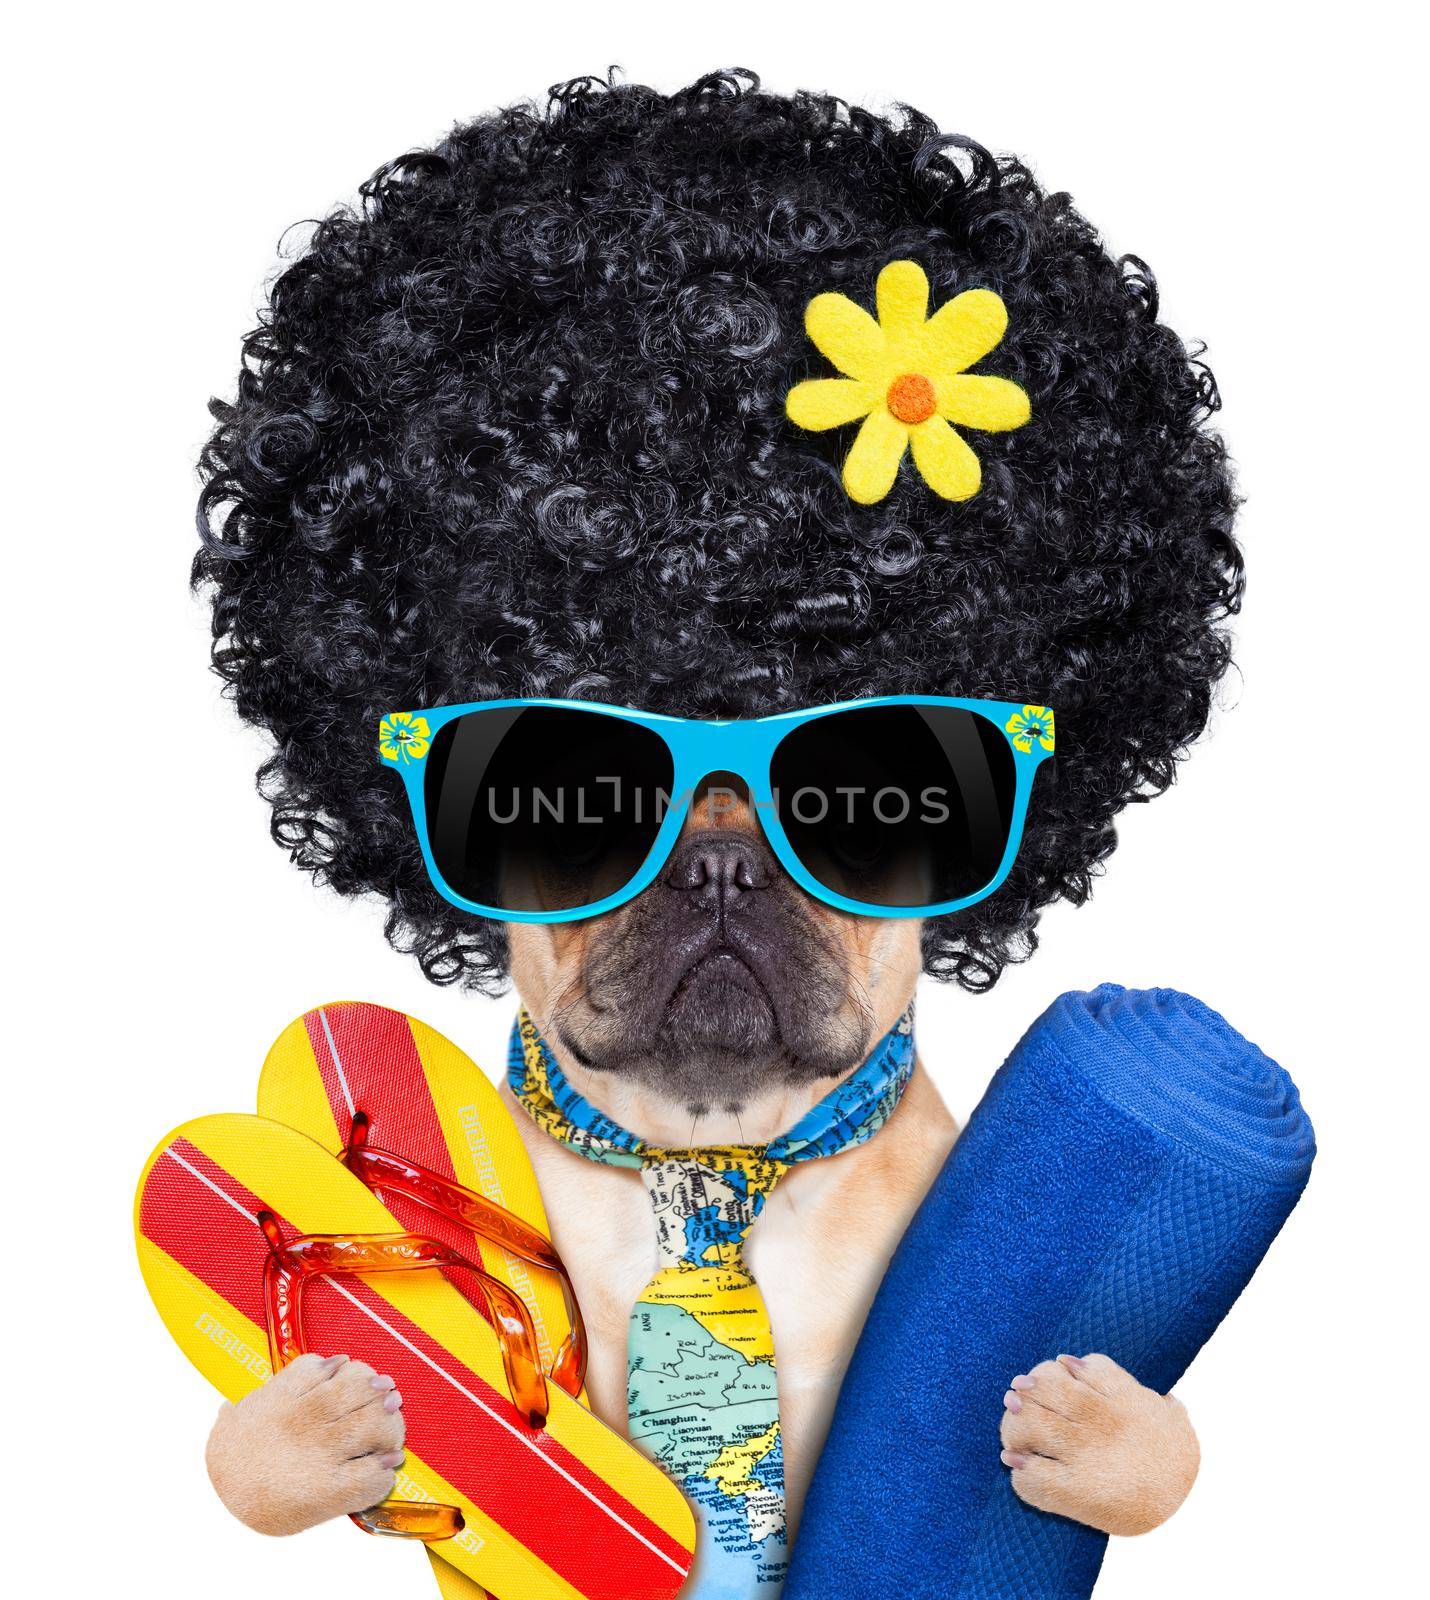 fawn bulldog with flip flops and towel , wearing a tie and sunglasses, isolated on white background